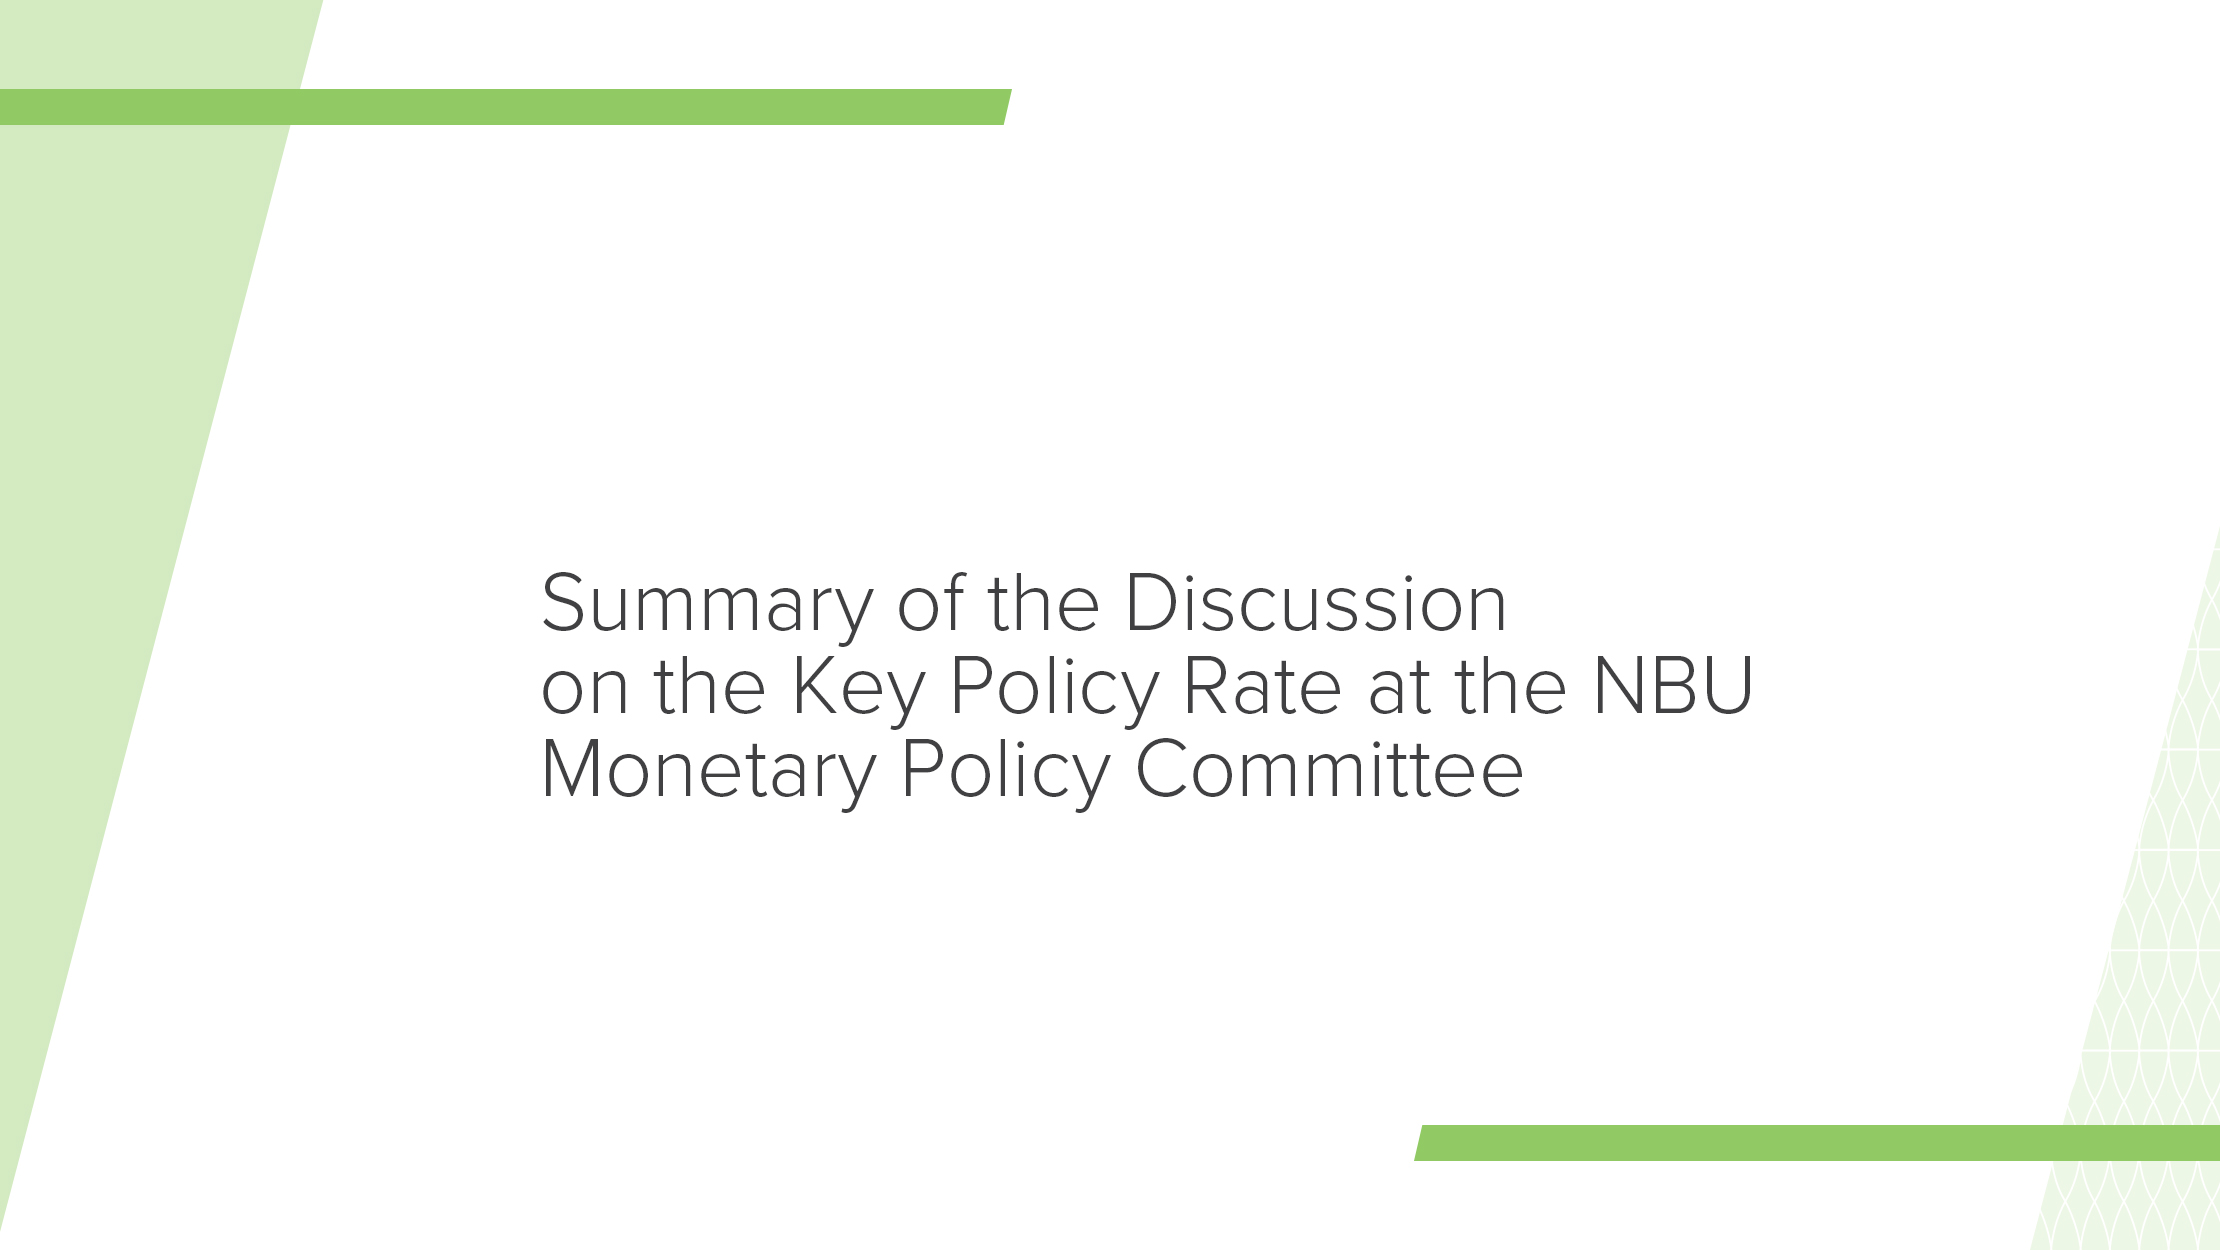 Summary of the Discussion on the Key Policy Rate at the recent meeting of the Monetary Policy Committee on 17 July 2019